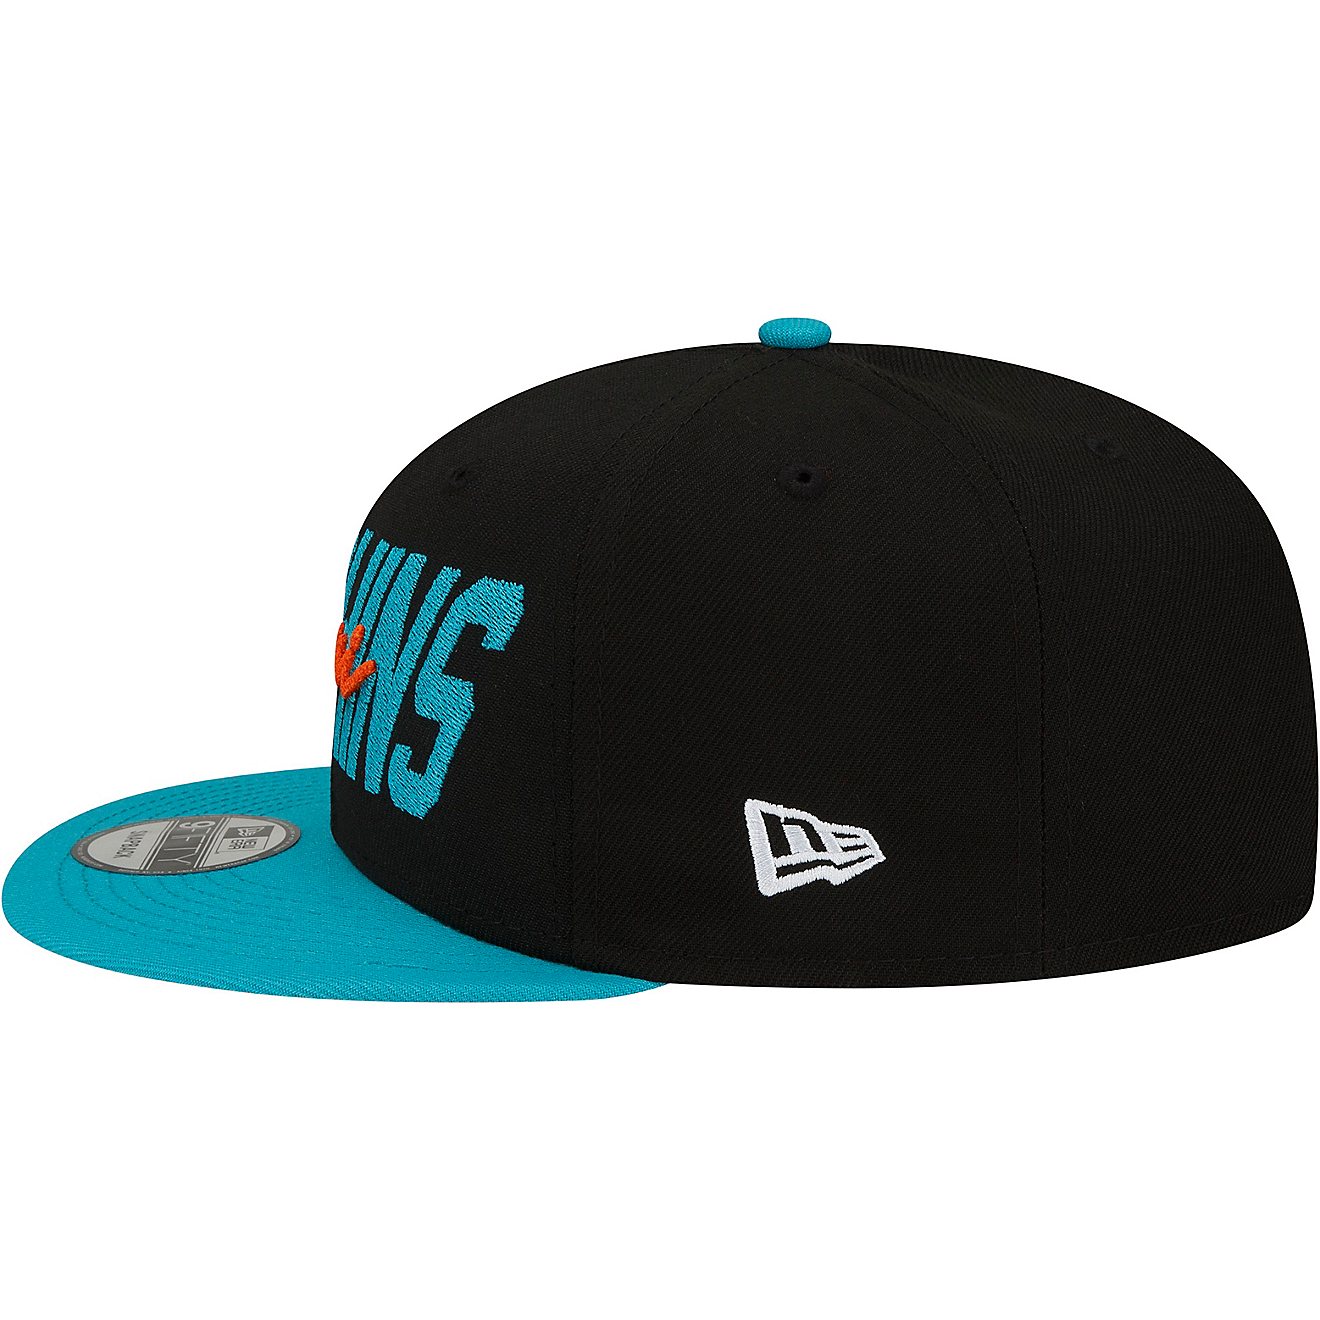 New Era Men's Miami Dolphins NFL Draft 22 9FIFTY Cap                                                                             - view number 5